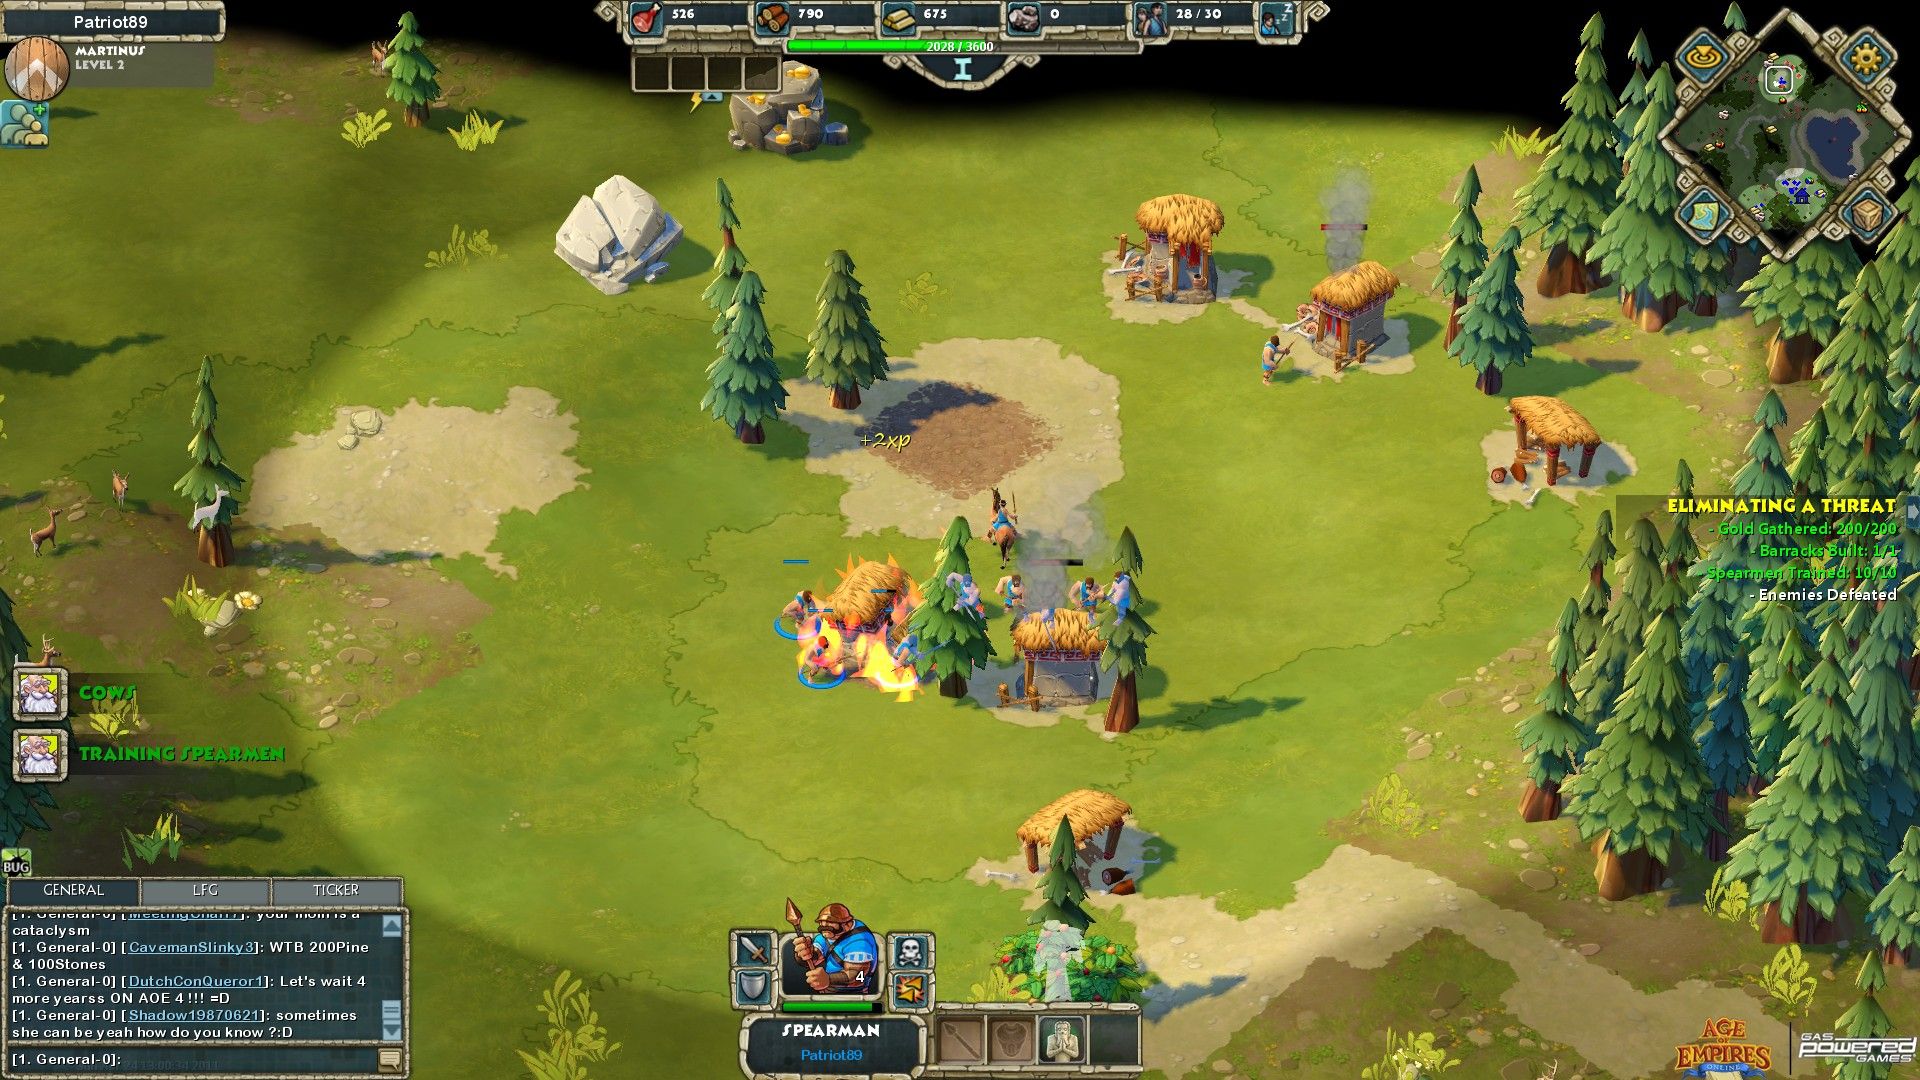 strategy-mmo-games-age-of-empires-online-burning-village-screenshot.jpg